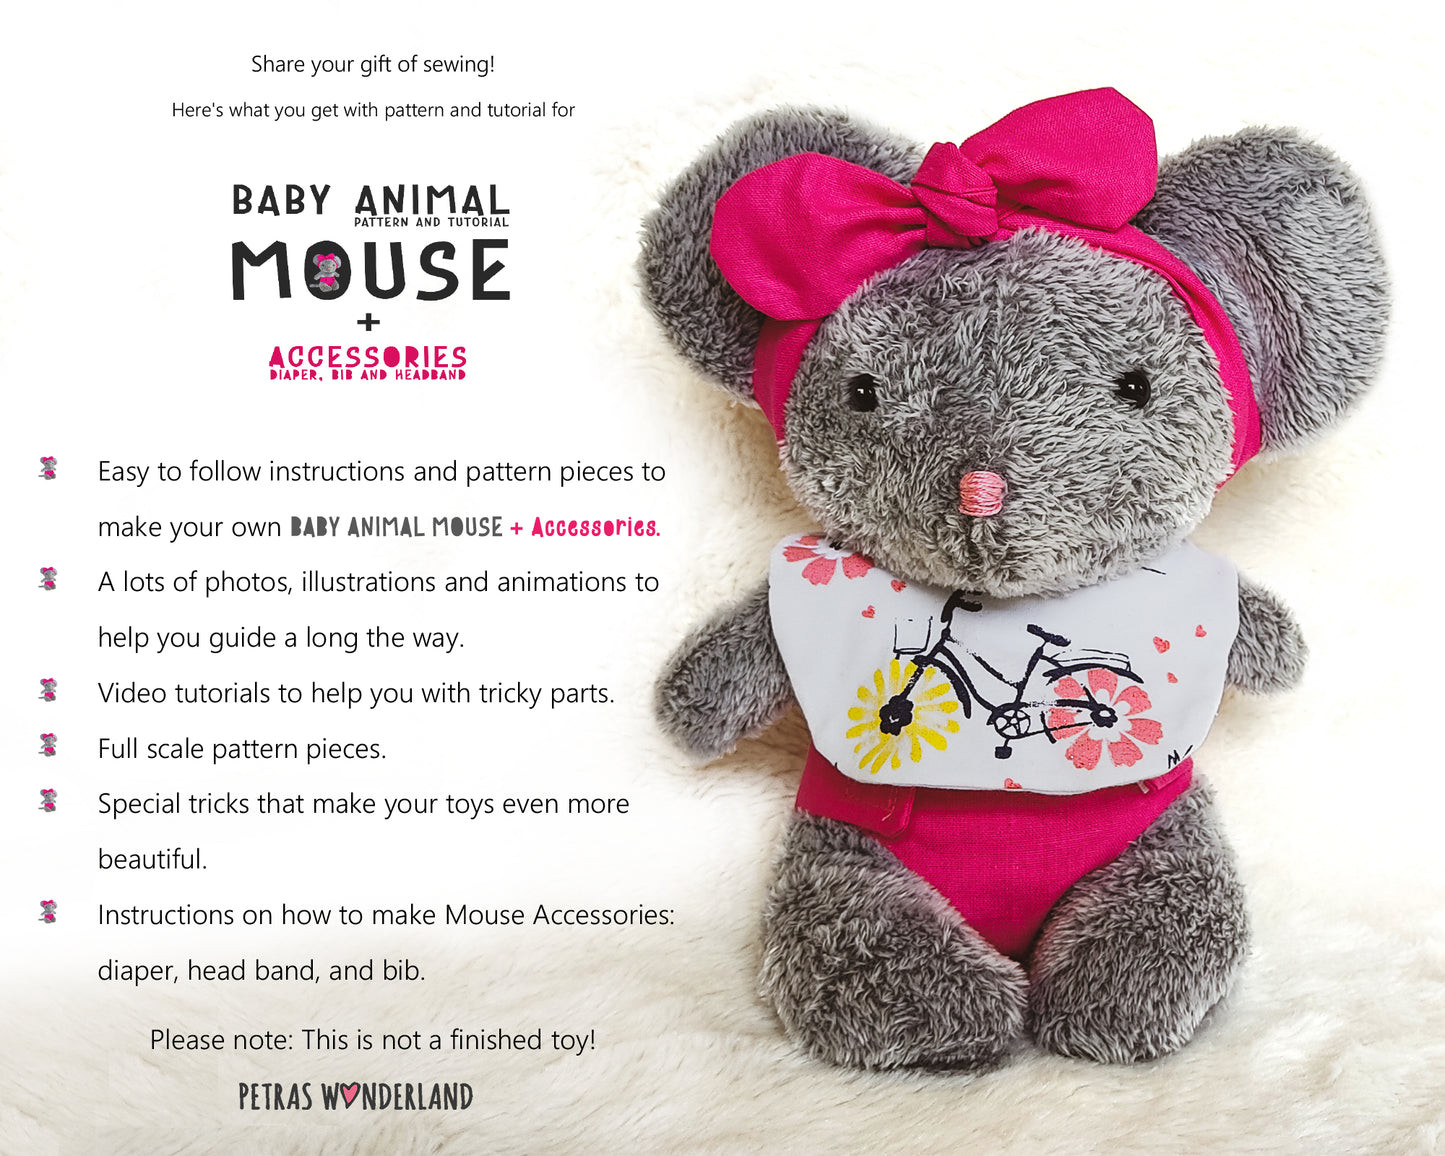 Baby Animal Mouse - PDF sewing pattern and tutorial 09